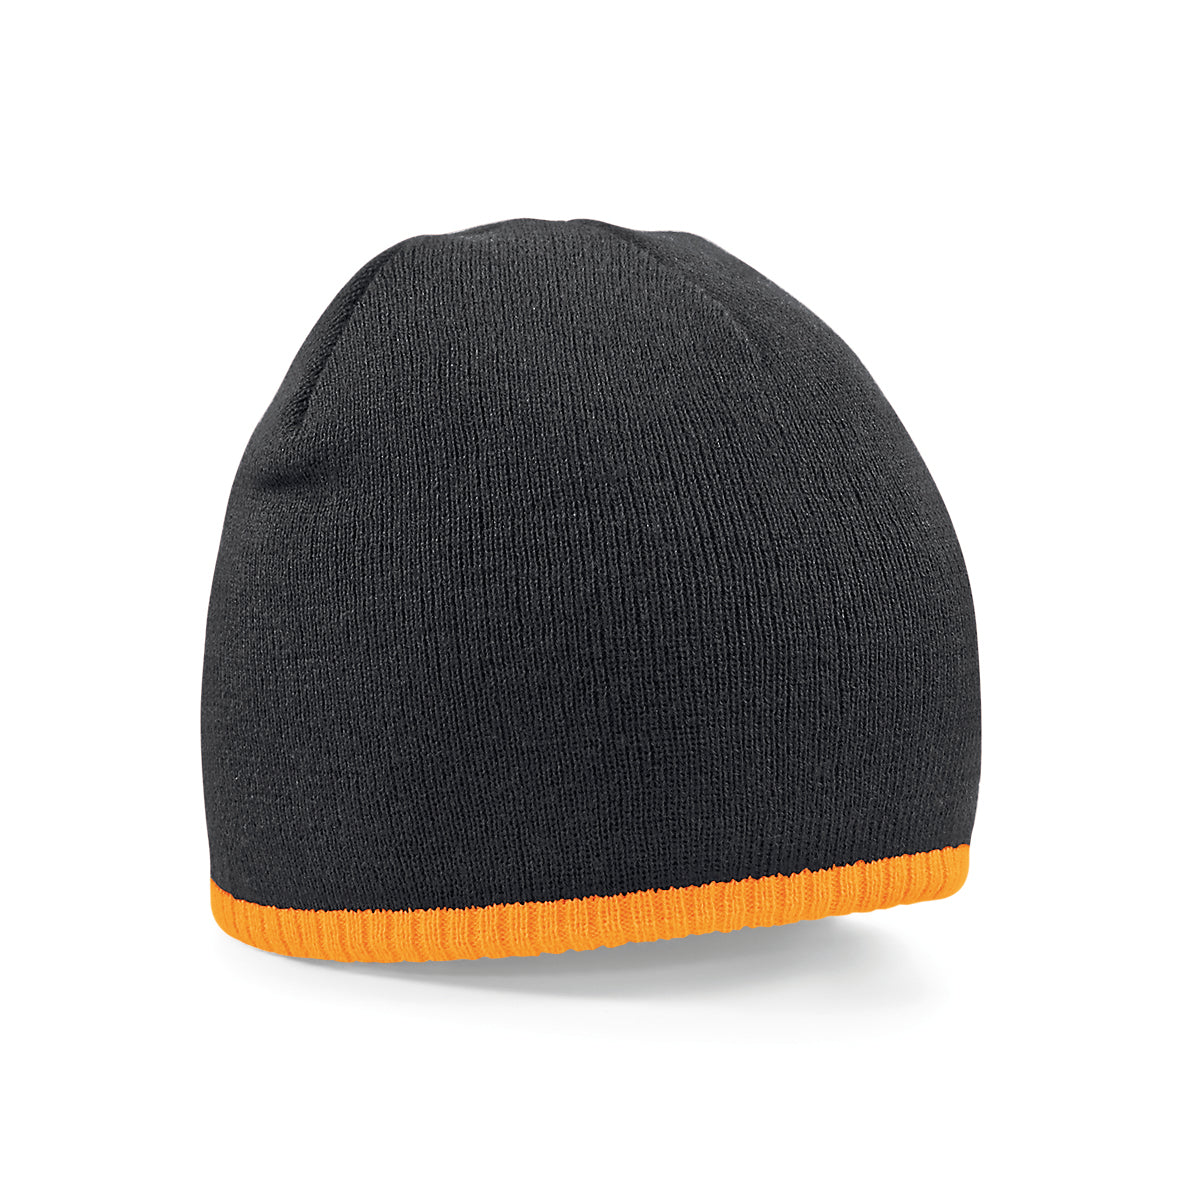 2 Tone Beanie- Contrast Colour Beanie - Pull-on Beanie - Available for Embroidery